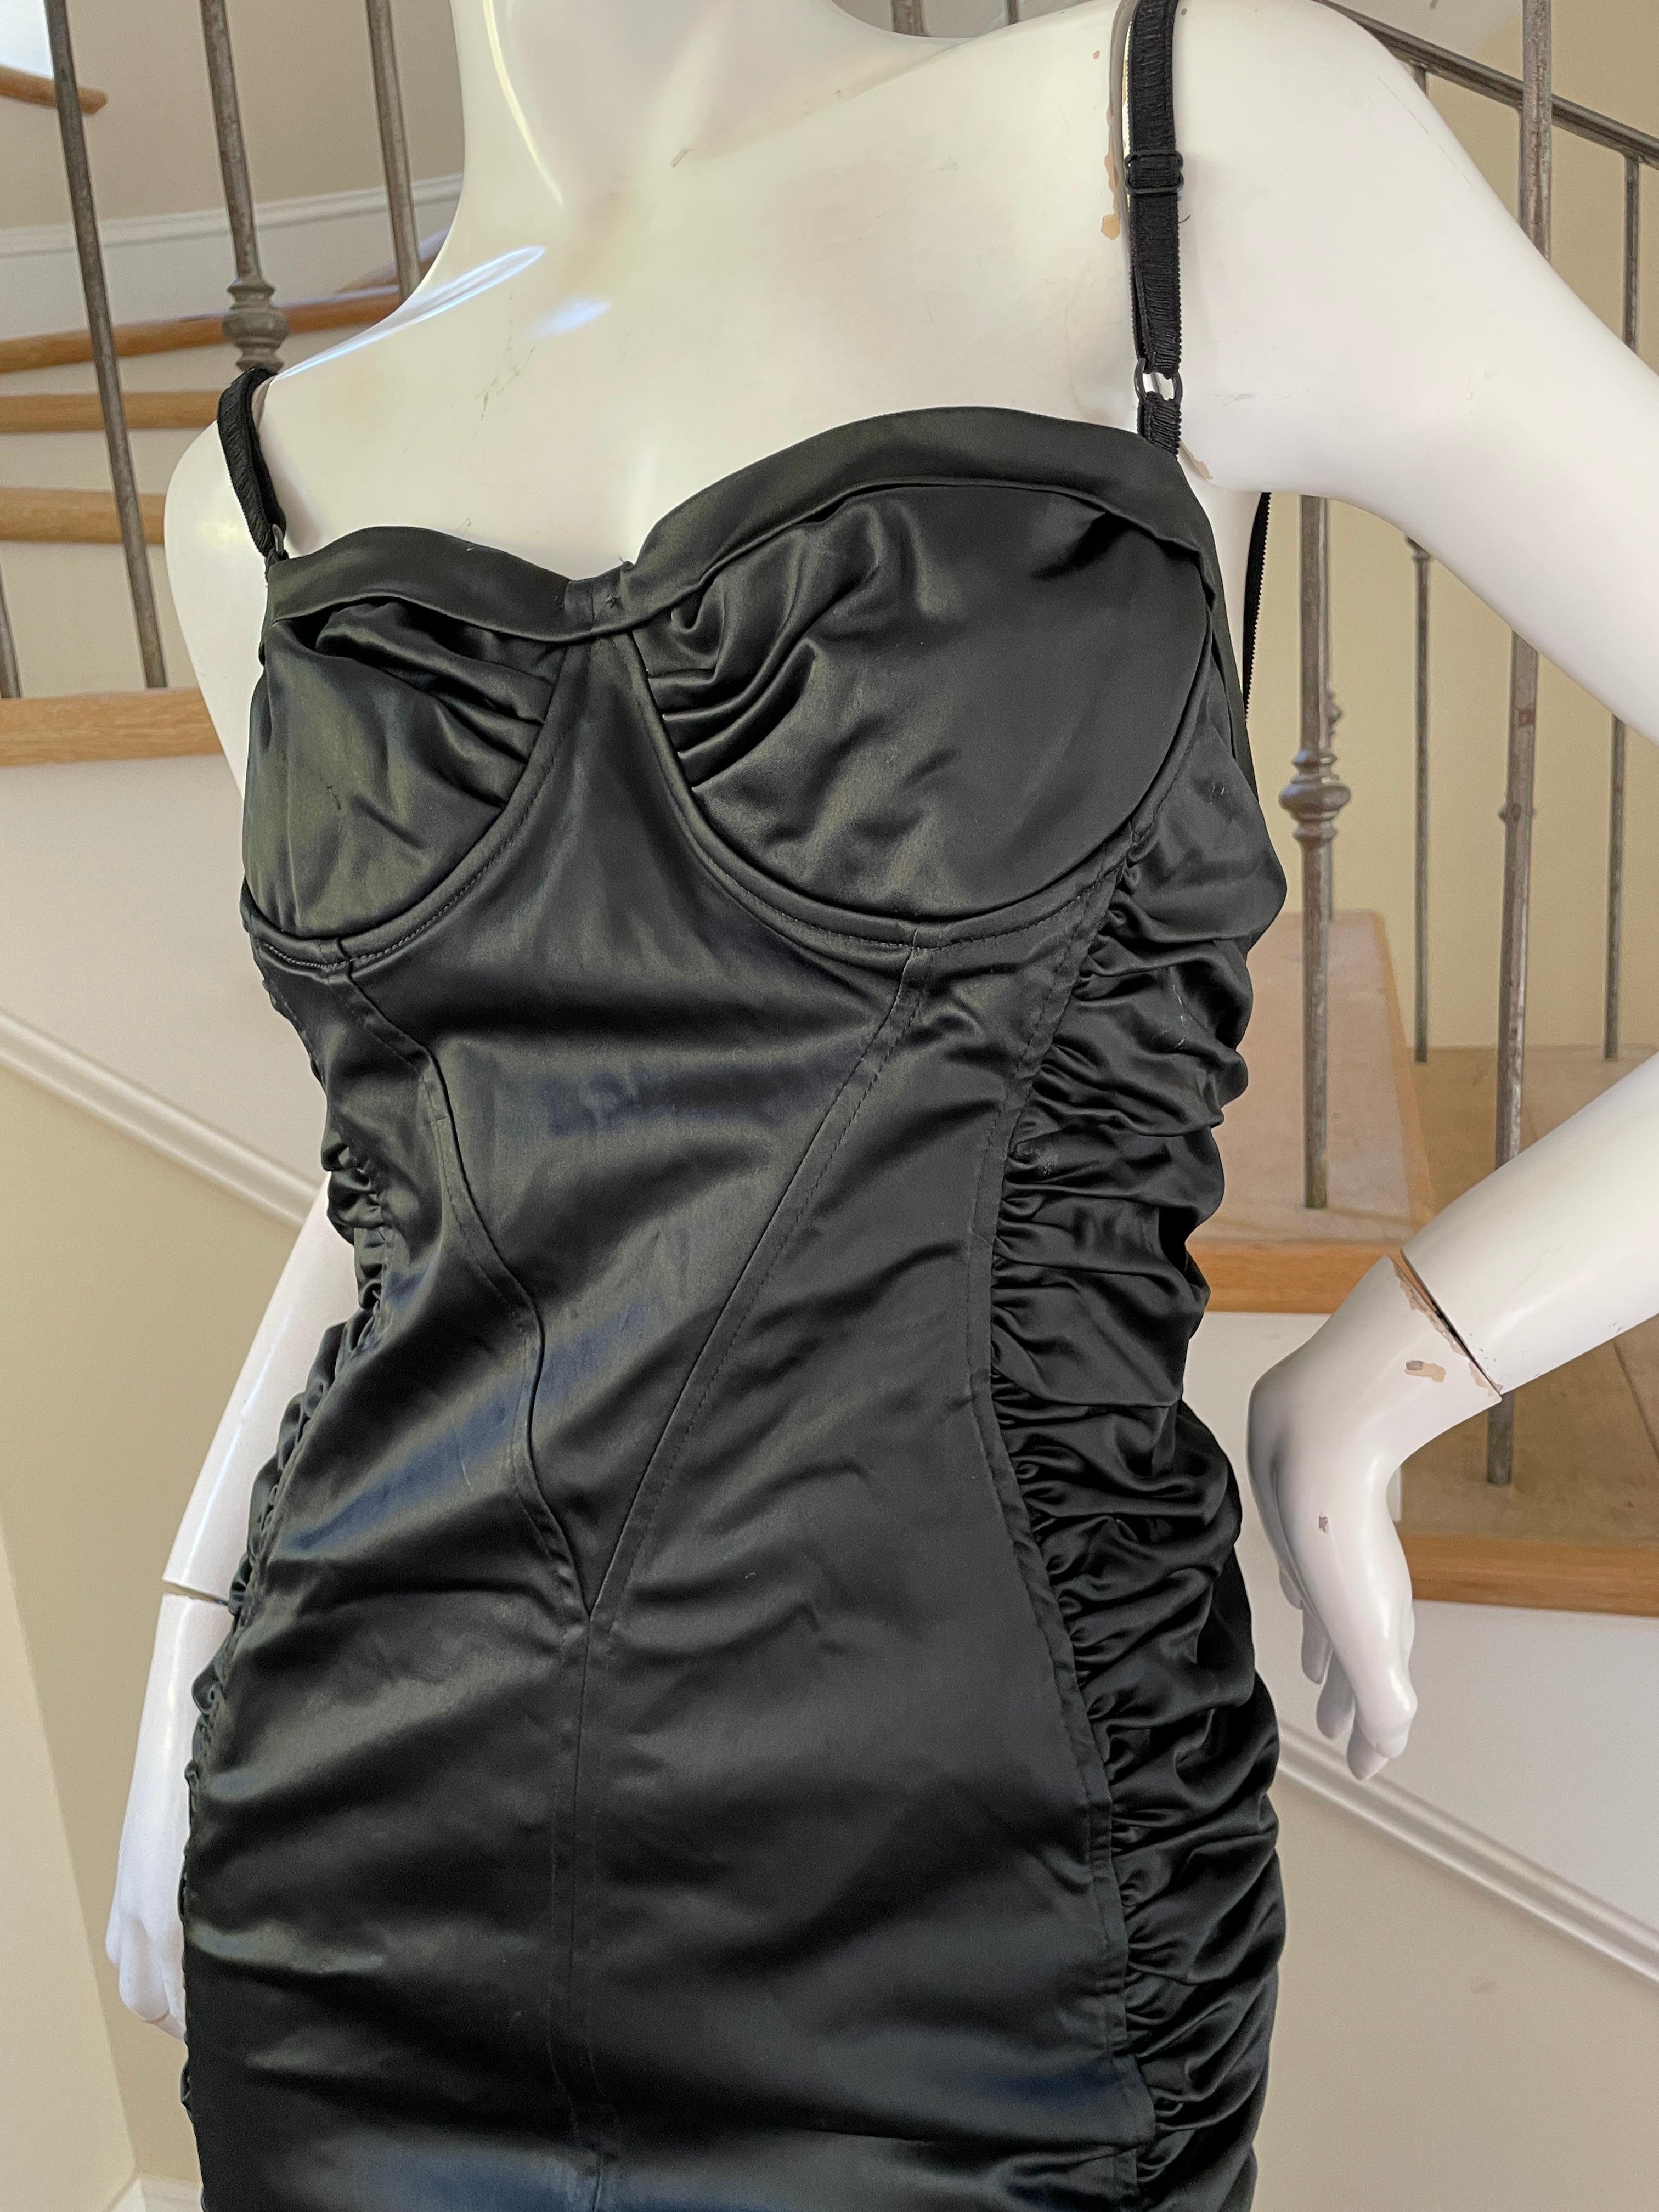 D&G by Dolce & Gabbana Vintage Black Ruched Cocktail Dress with Underwire Bra
Size 42 runs true to size
 Bust 34